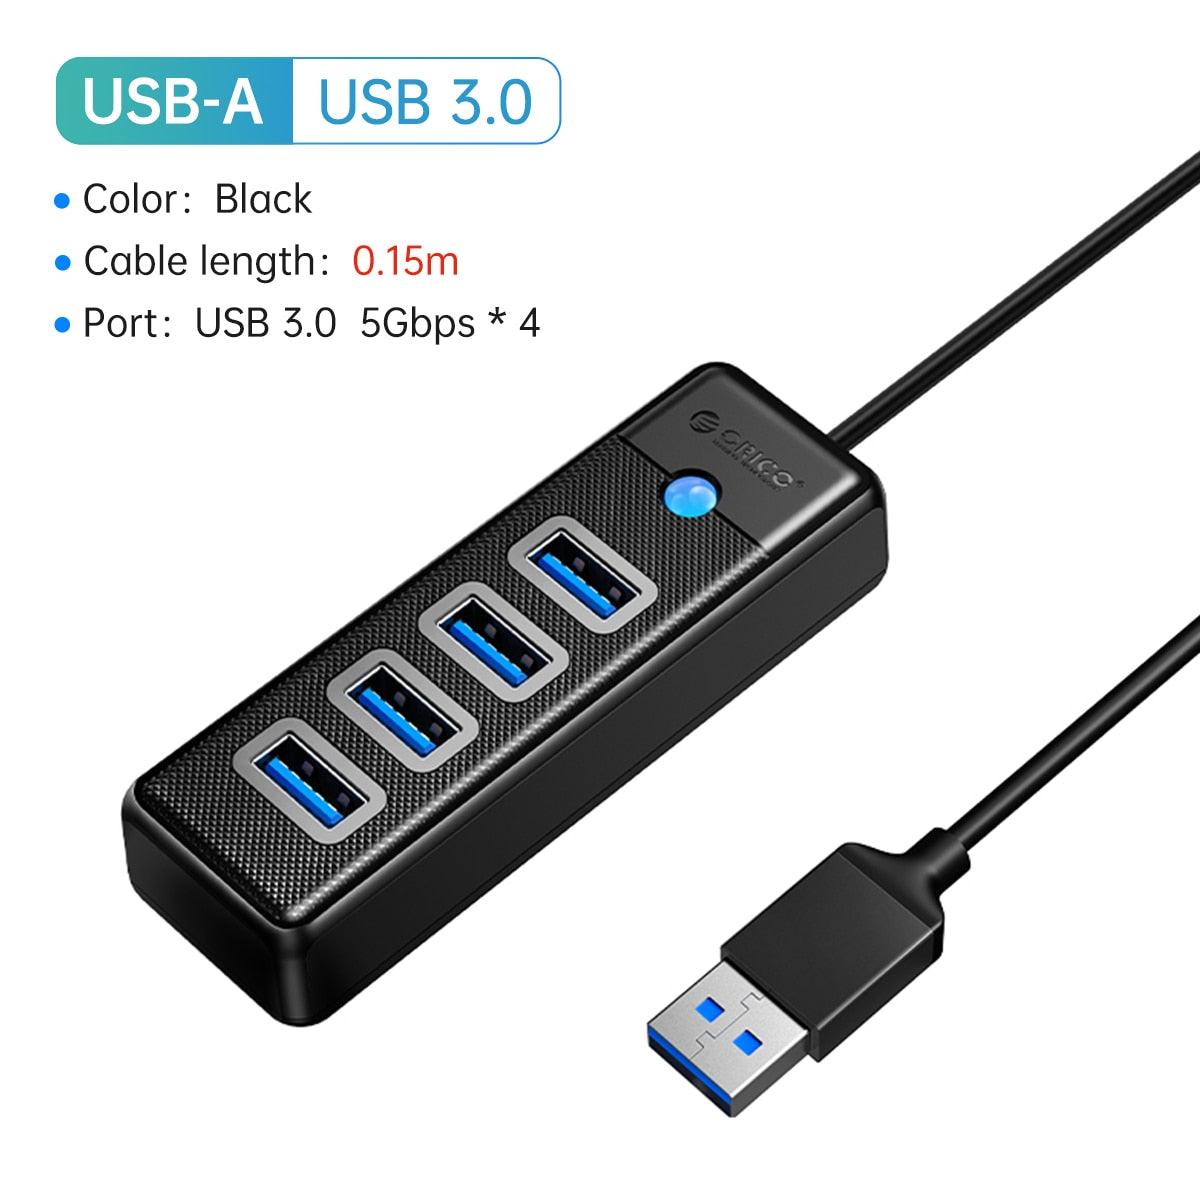 ORICO 4 Ports USB 3.0 5Gbps High Speed Multi Type C Splitter Ultra-Slim OTG Adapter For PC Computer Accessories Macbook Pro